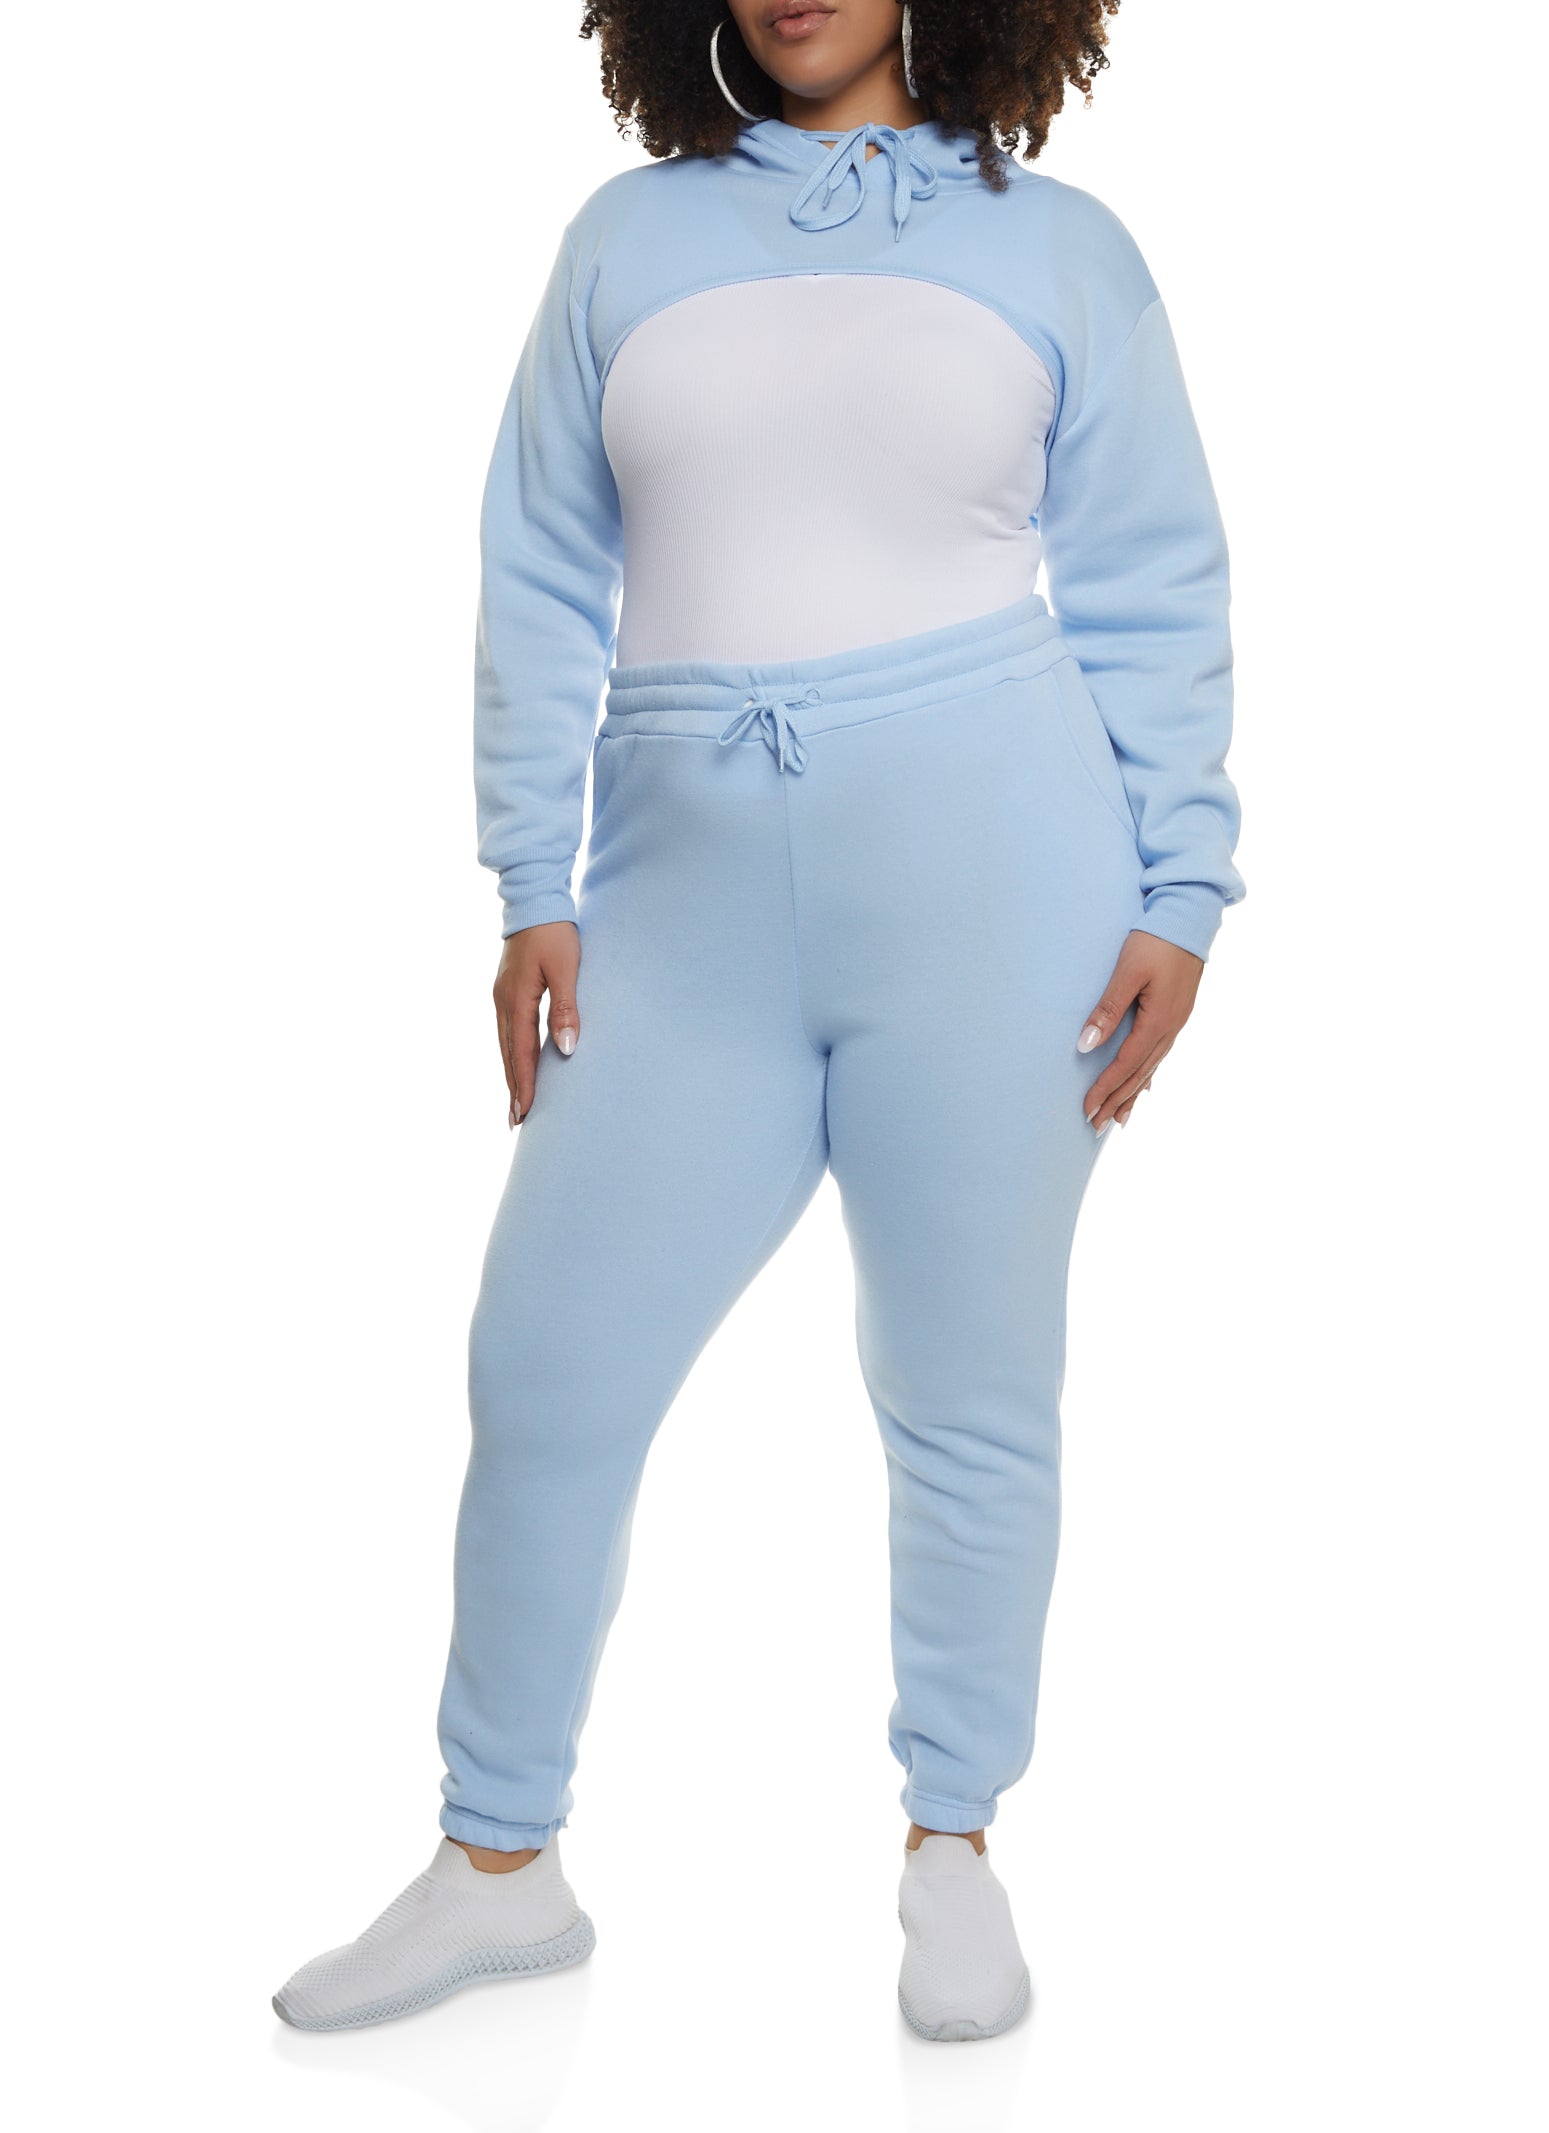 Plus Size Contrast Piping Active Leggings